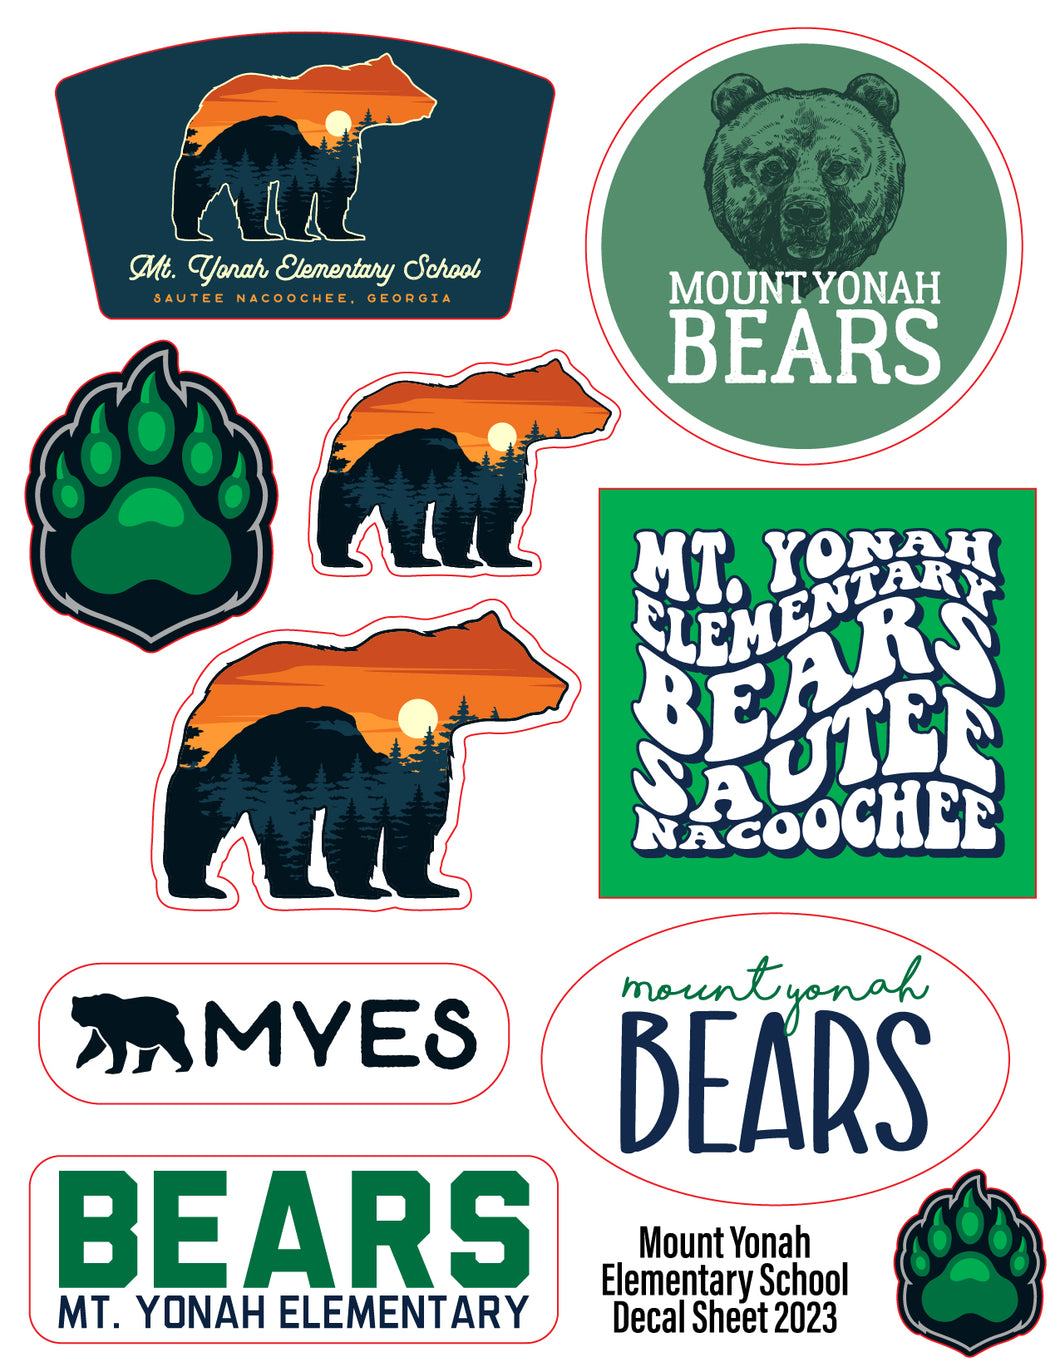 MYES Bears Decal Sheet (10 stickers)